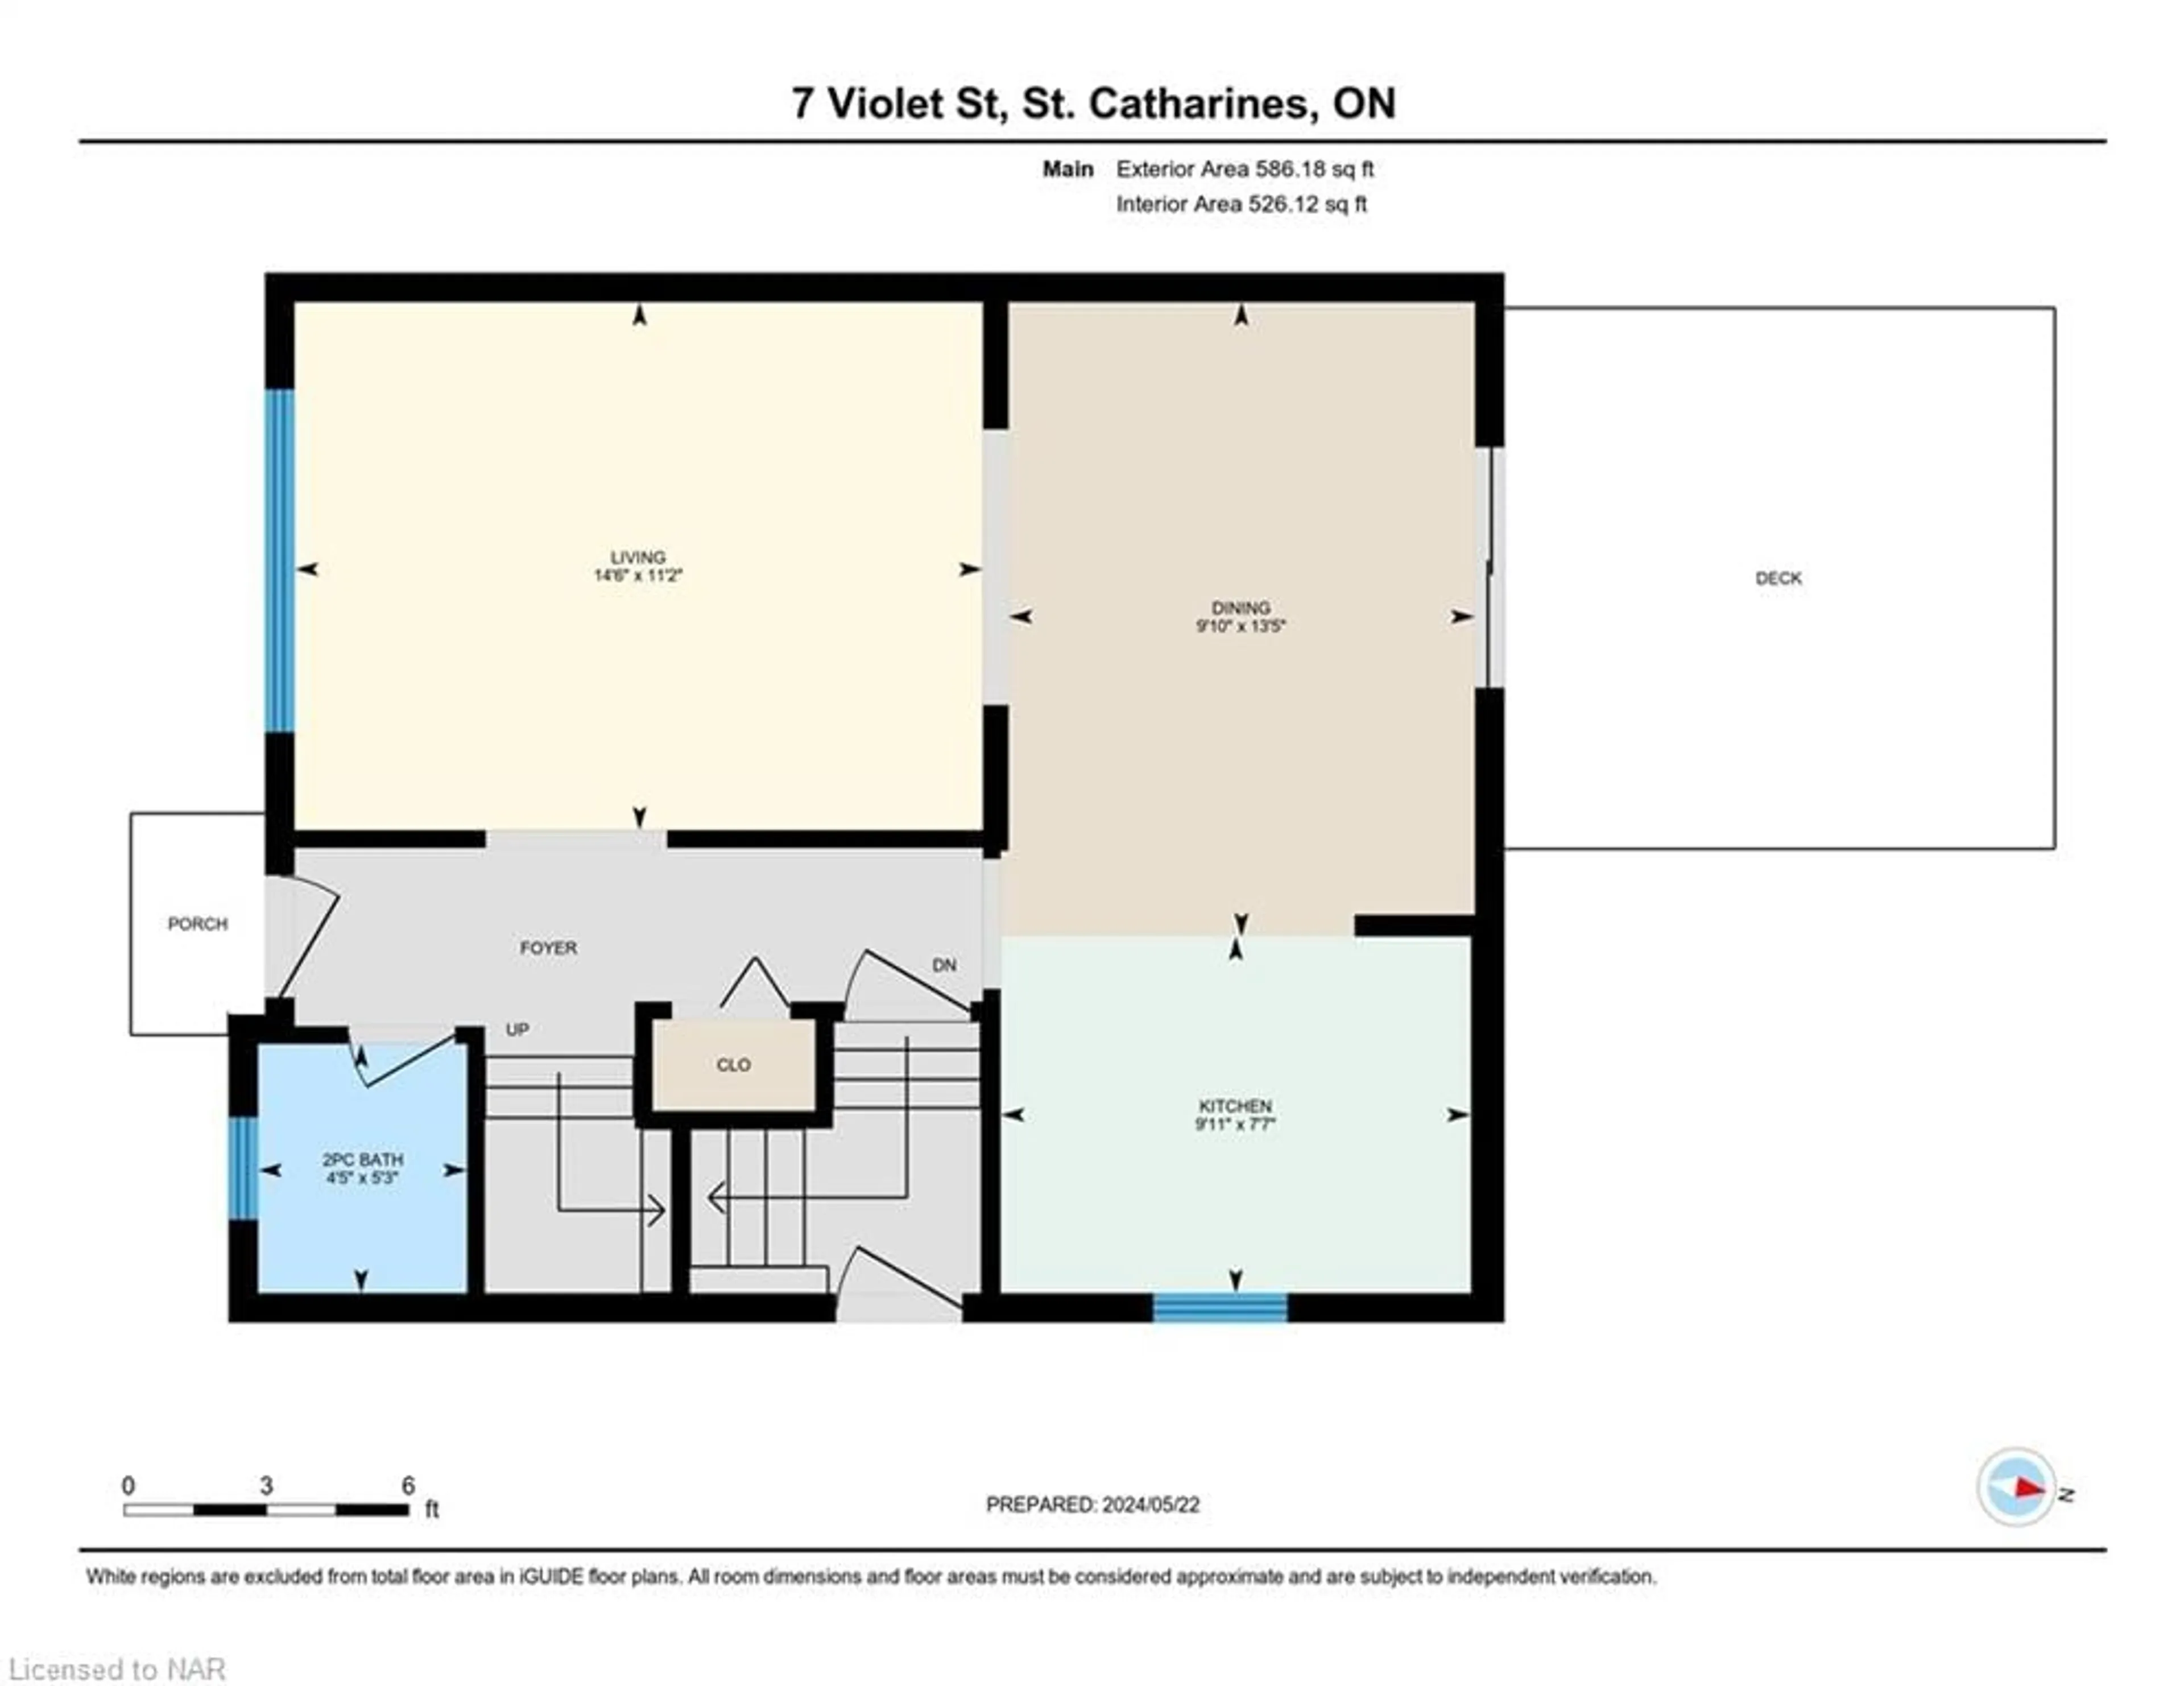 Floor plan for 7 Violet St, St. Catharines Ontario L2S 2X1